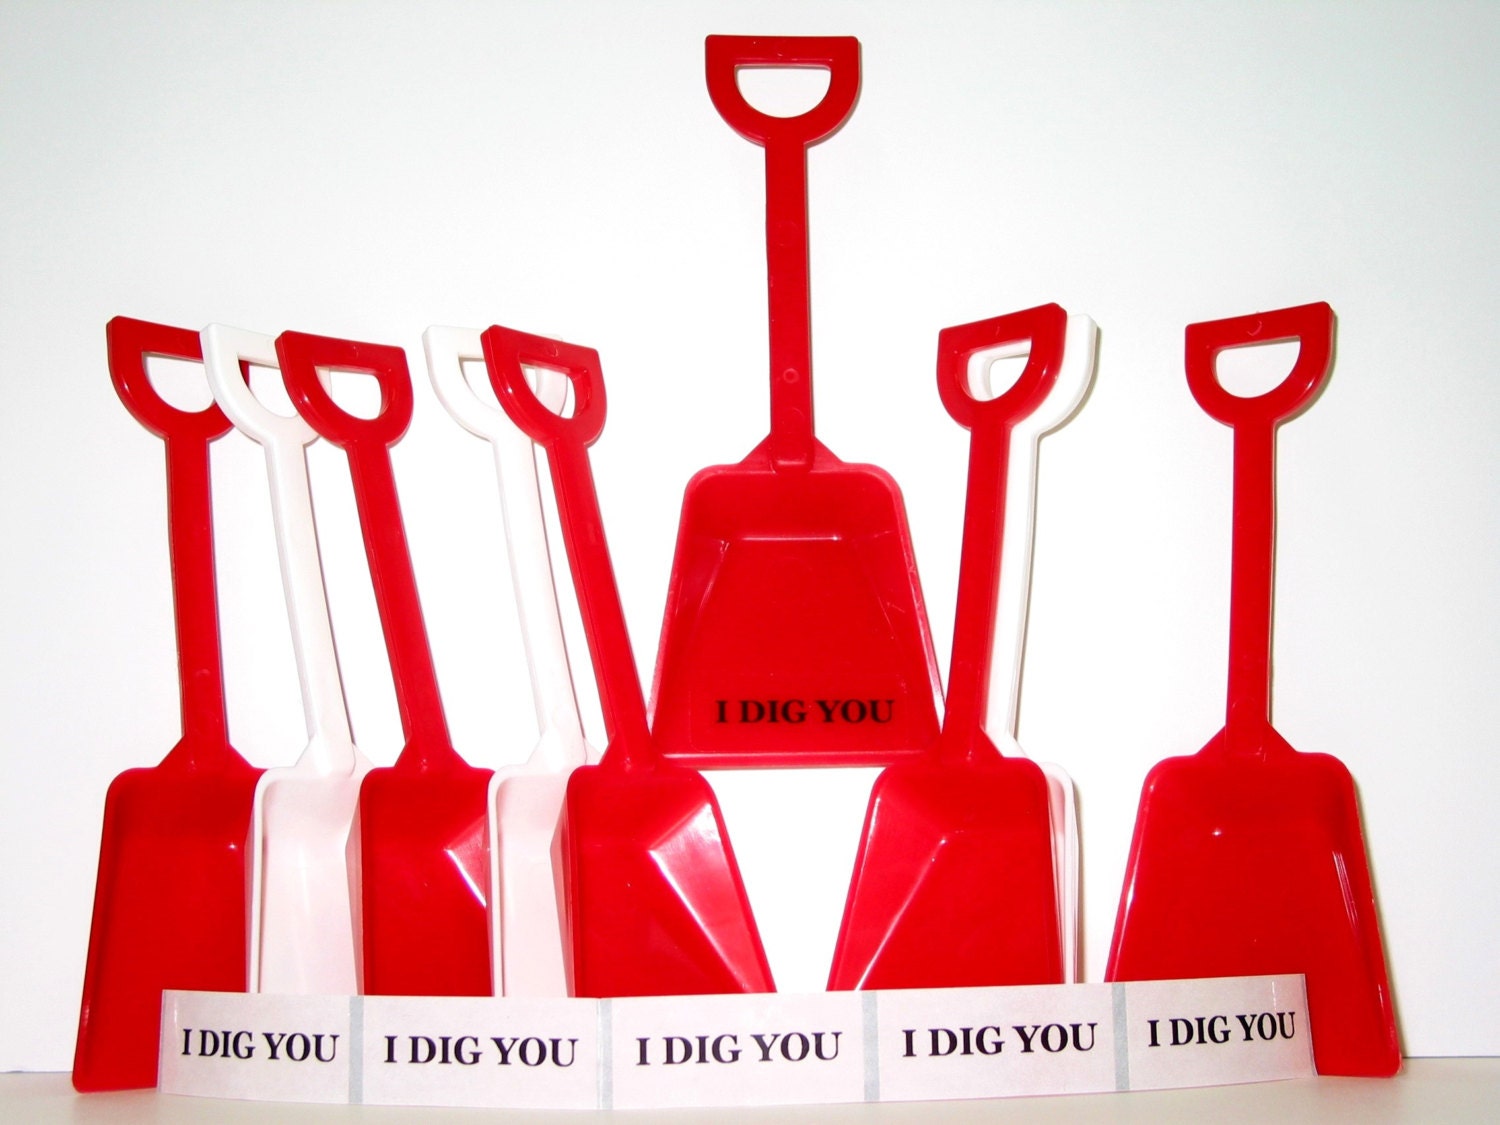 12 White Toy Plastic Sand Beach Shovels & I Dig You Stickers  Made in America* 